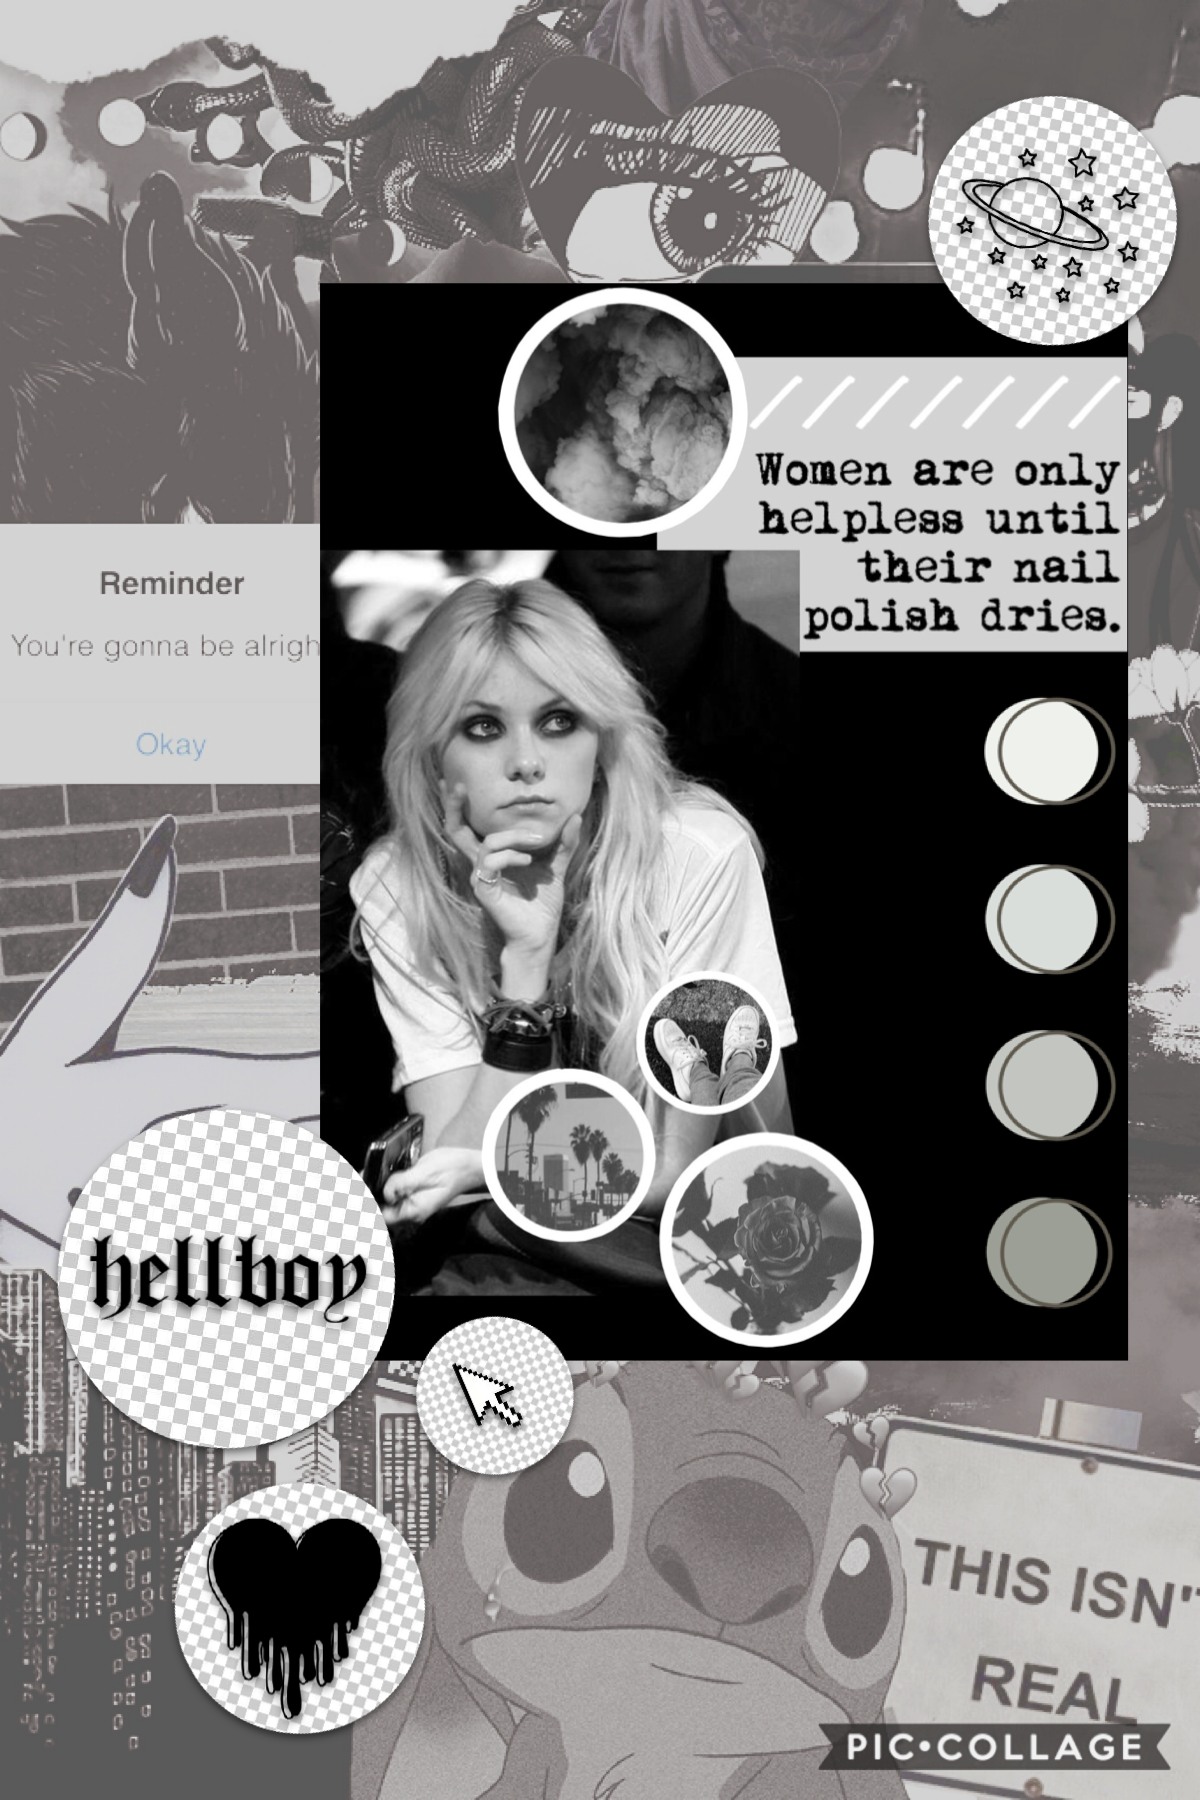 Hope y’all enjoy this collage featuring my queen Taylor Momsen